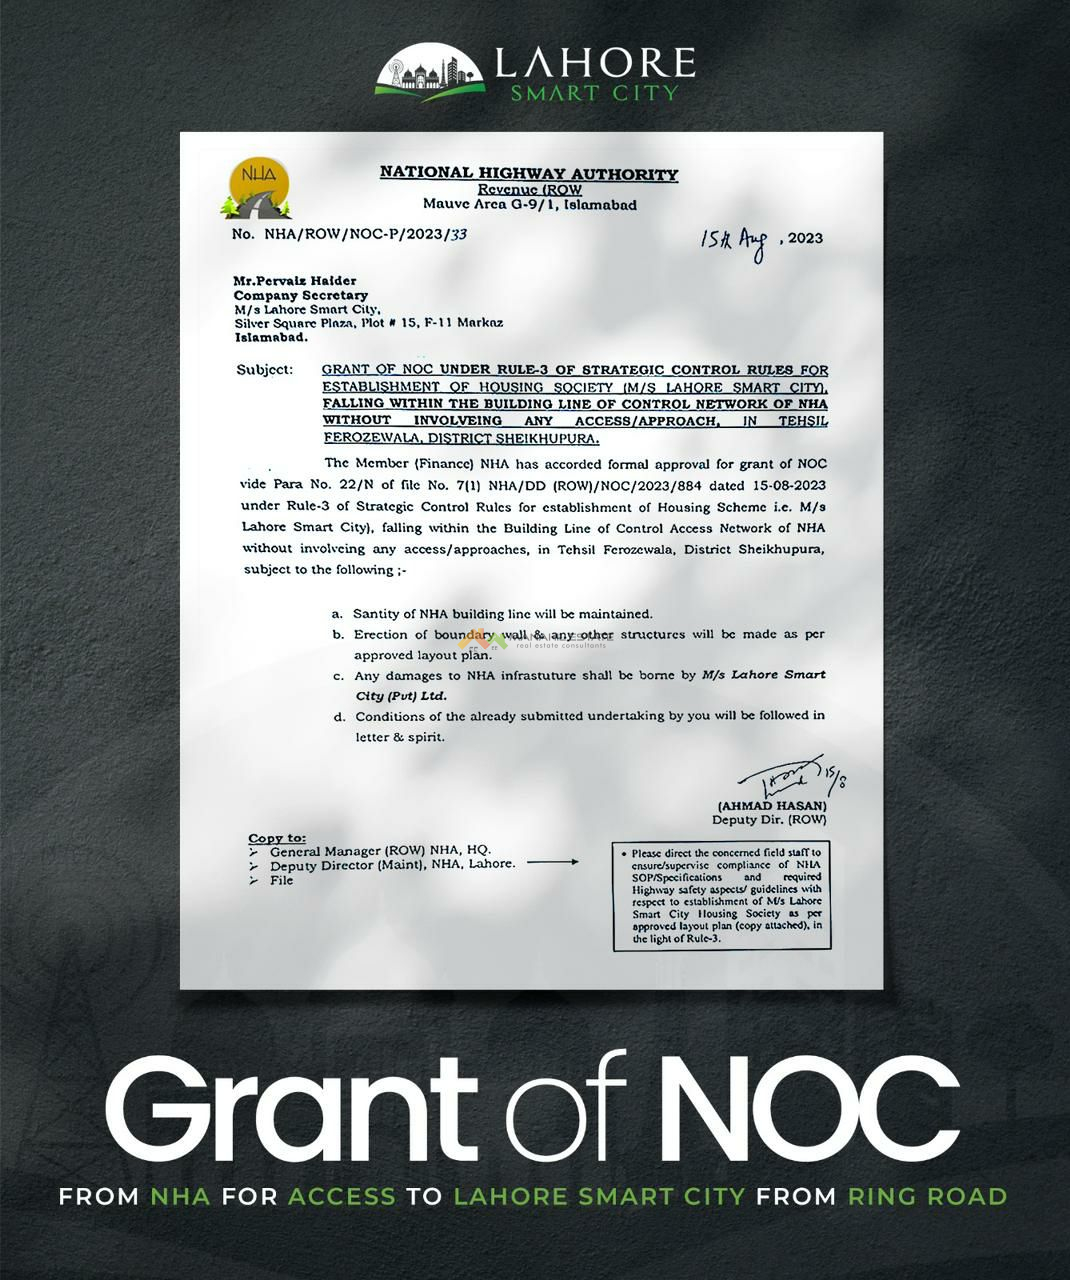 NHA Grants NOC to LSC for Ring Road Access